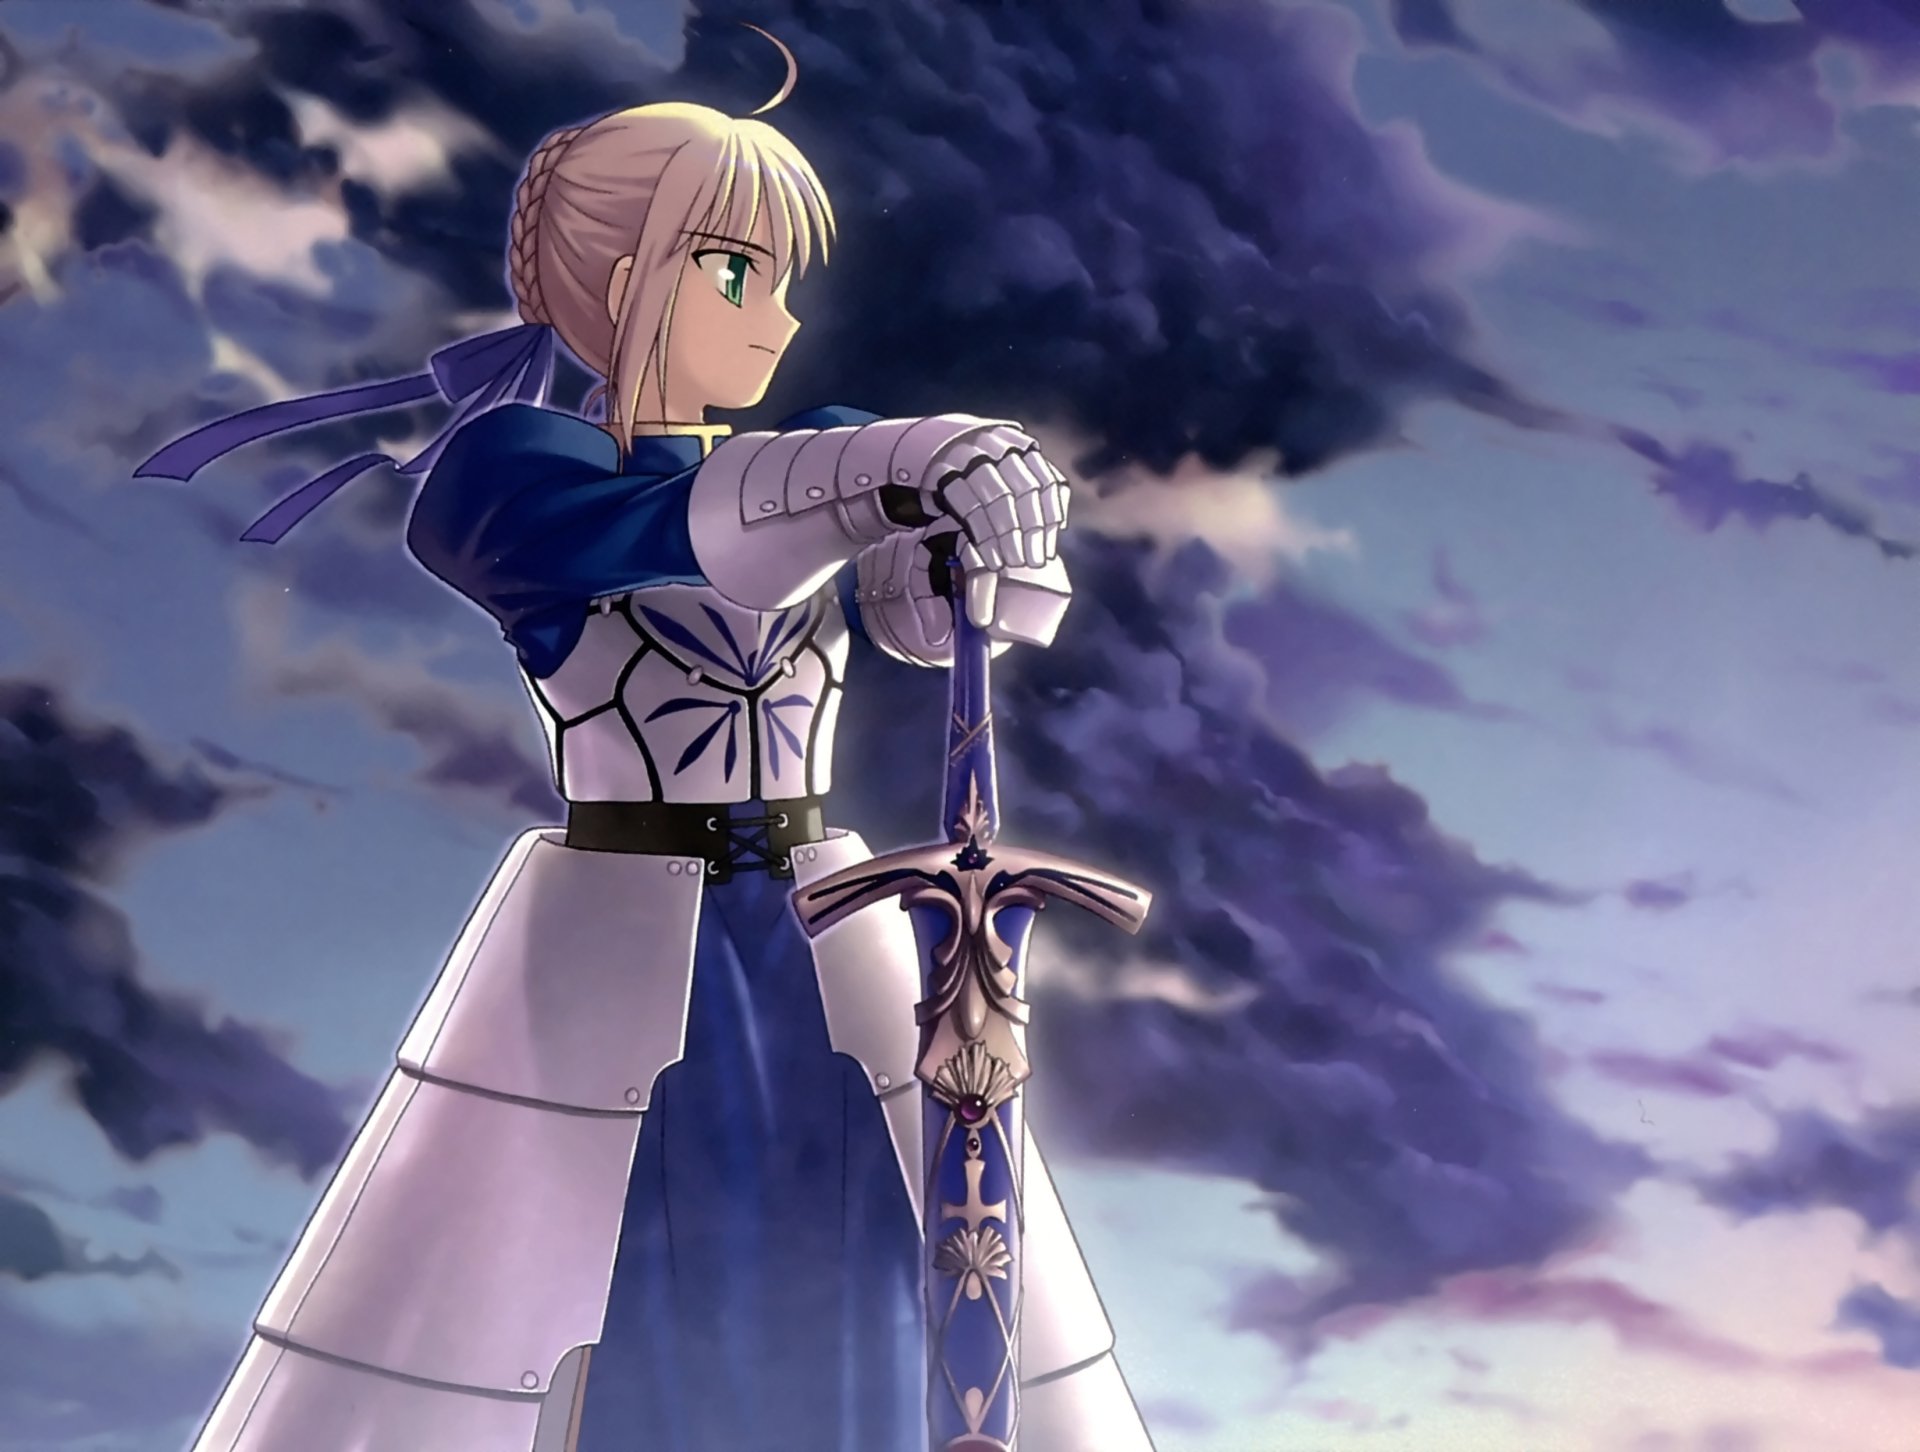 Download Anime Fate/Stay Night HD Wallpaper